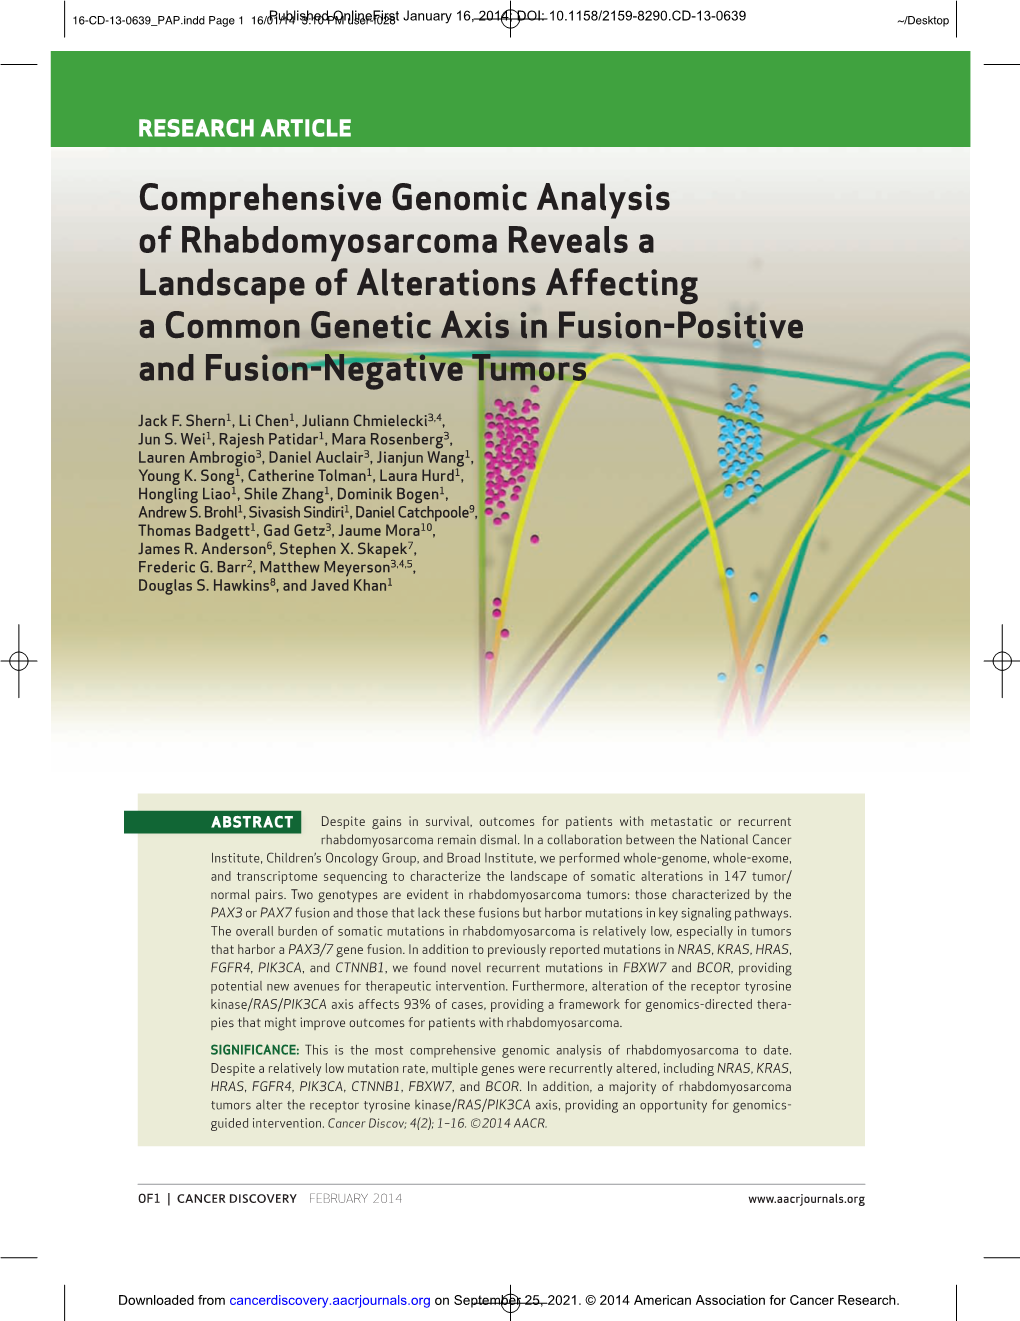 Comprehensive Genomic Analysis of Rhabdomyosarcoma Reveals a Landscape of Alterations Affecting a Common Genetic Axis in Fusion-Positive and Fusion-Negative Tumors